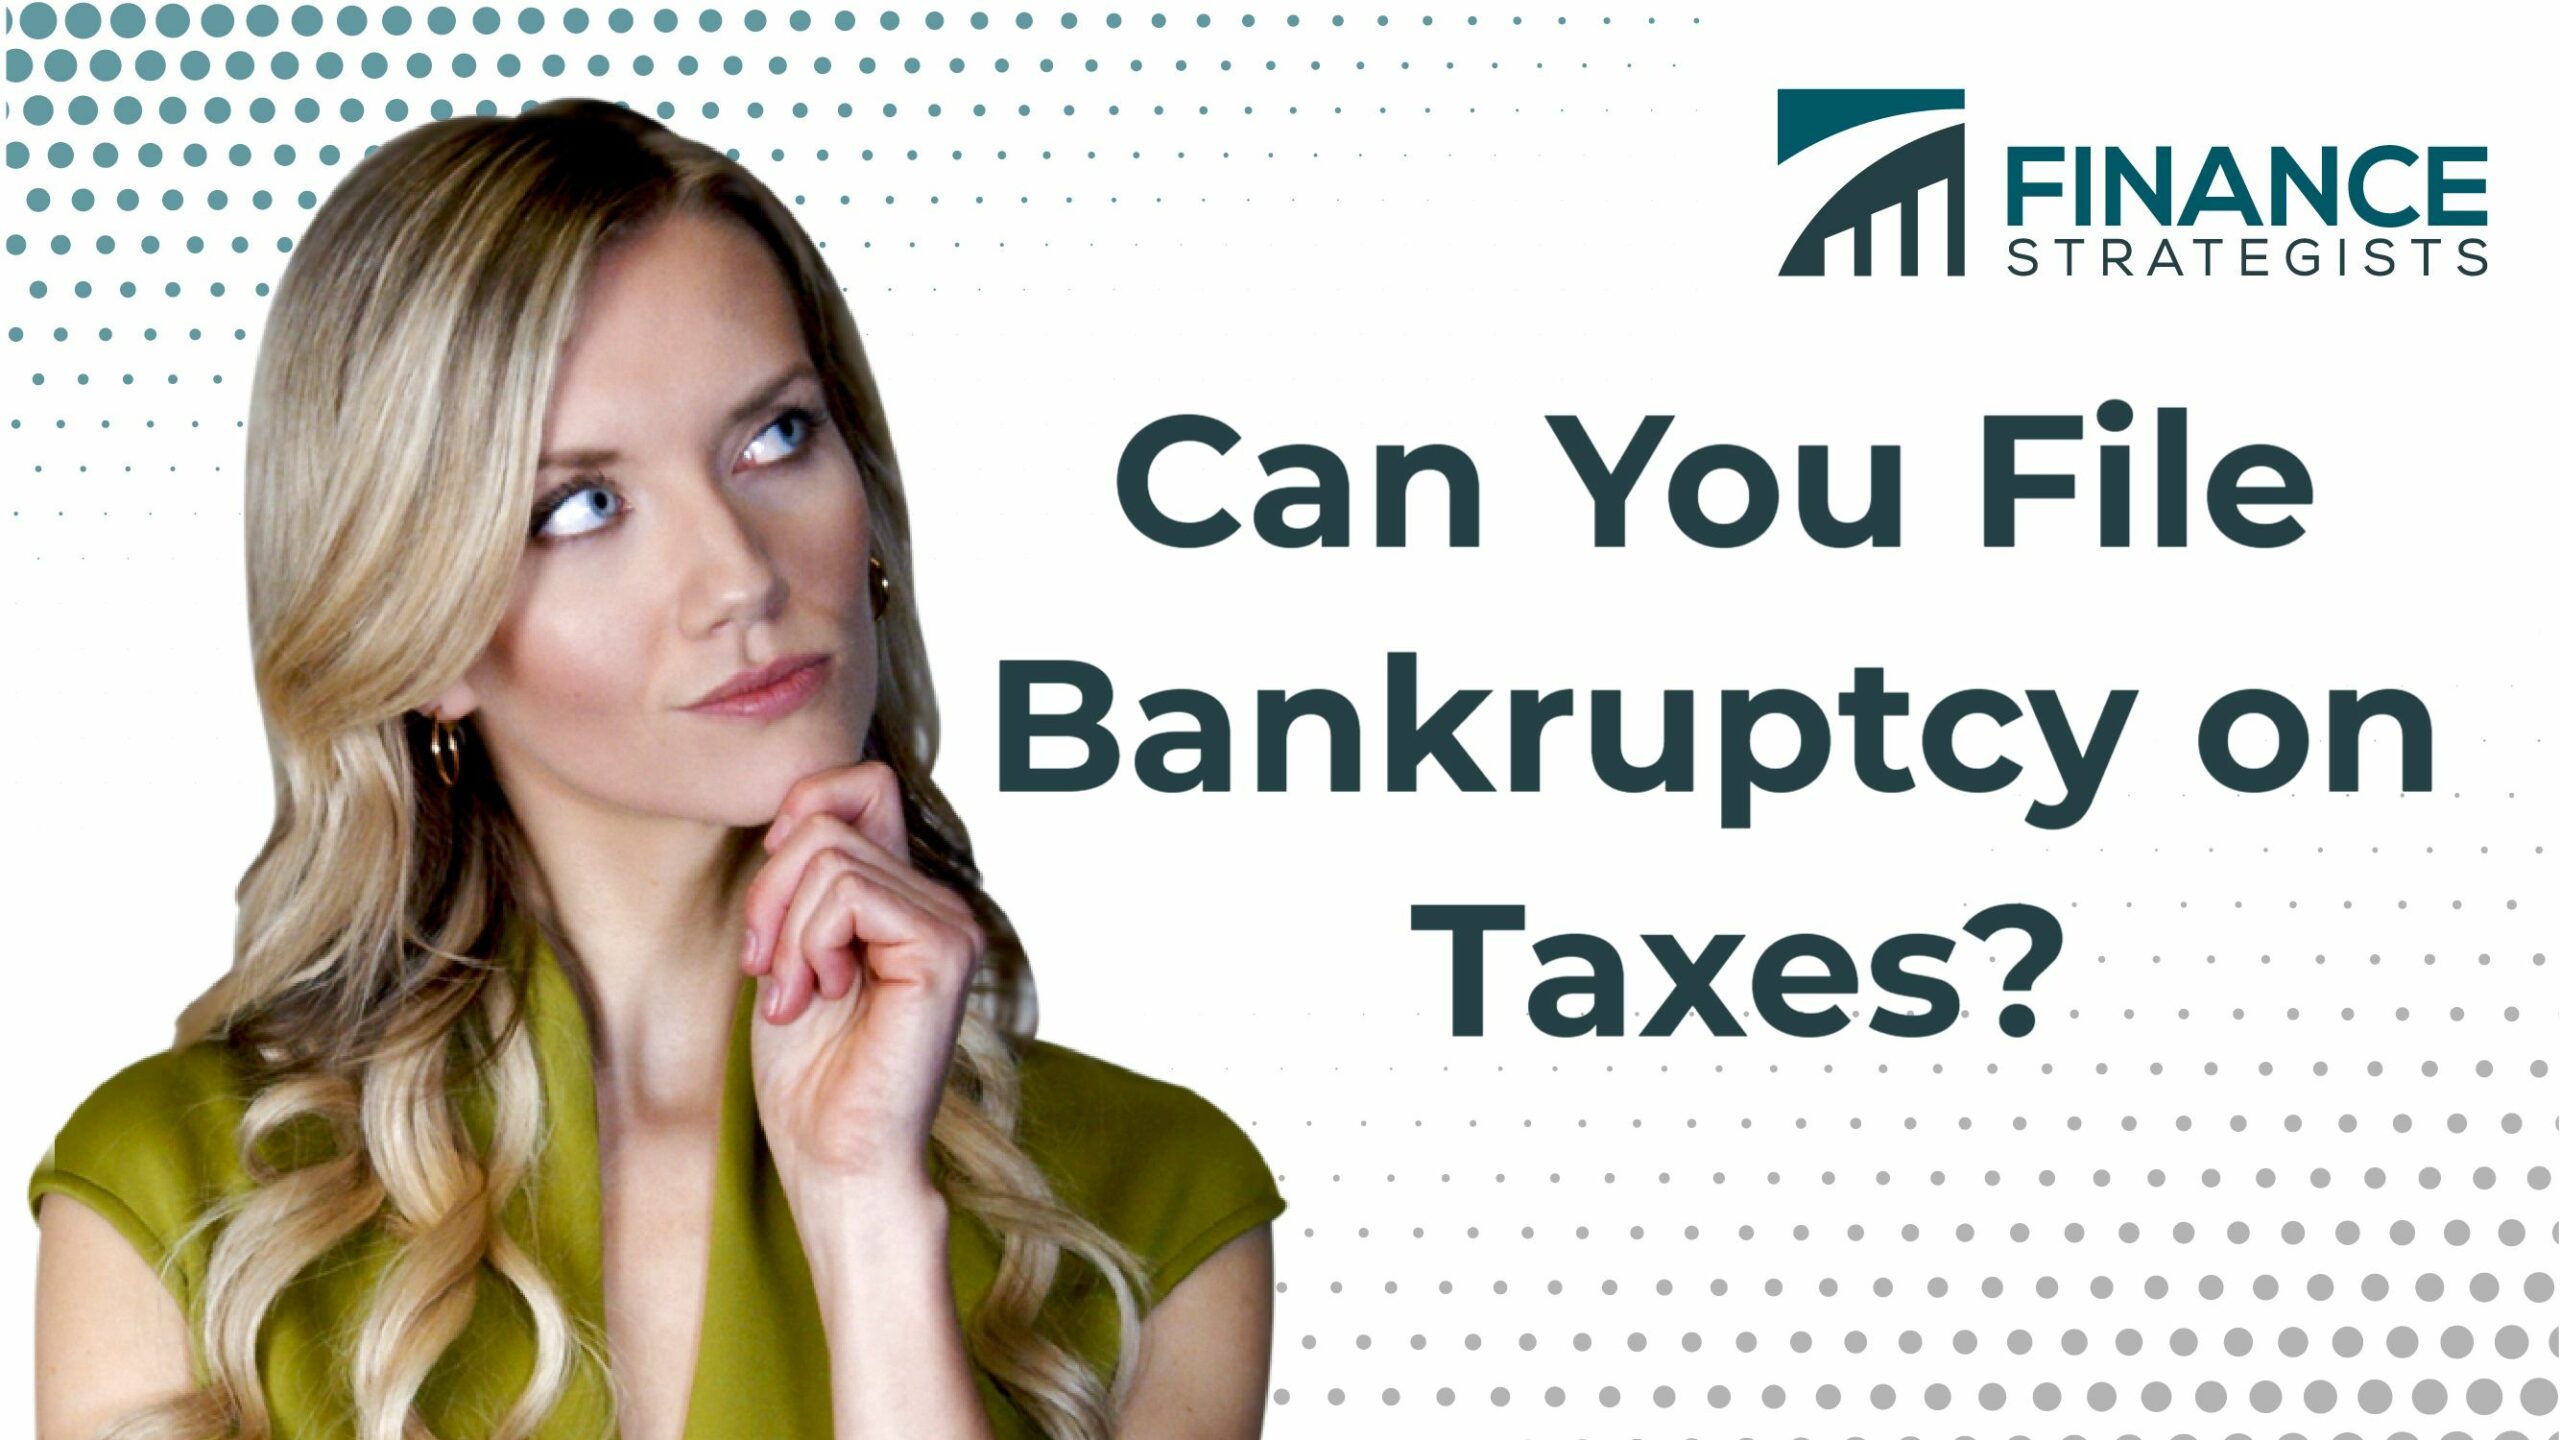 Can You File Bankruptcy on Taxes?